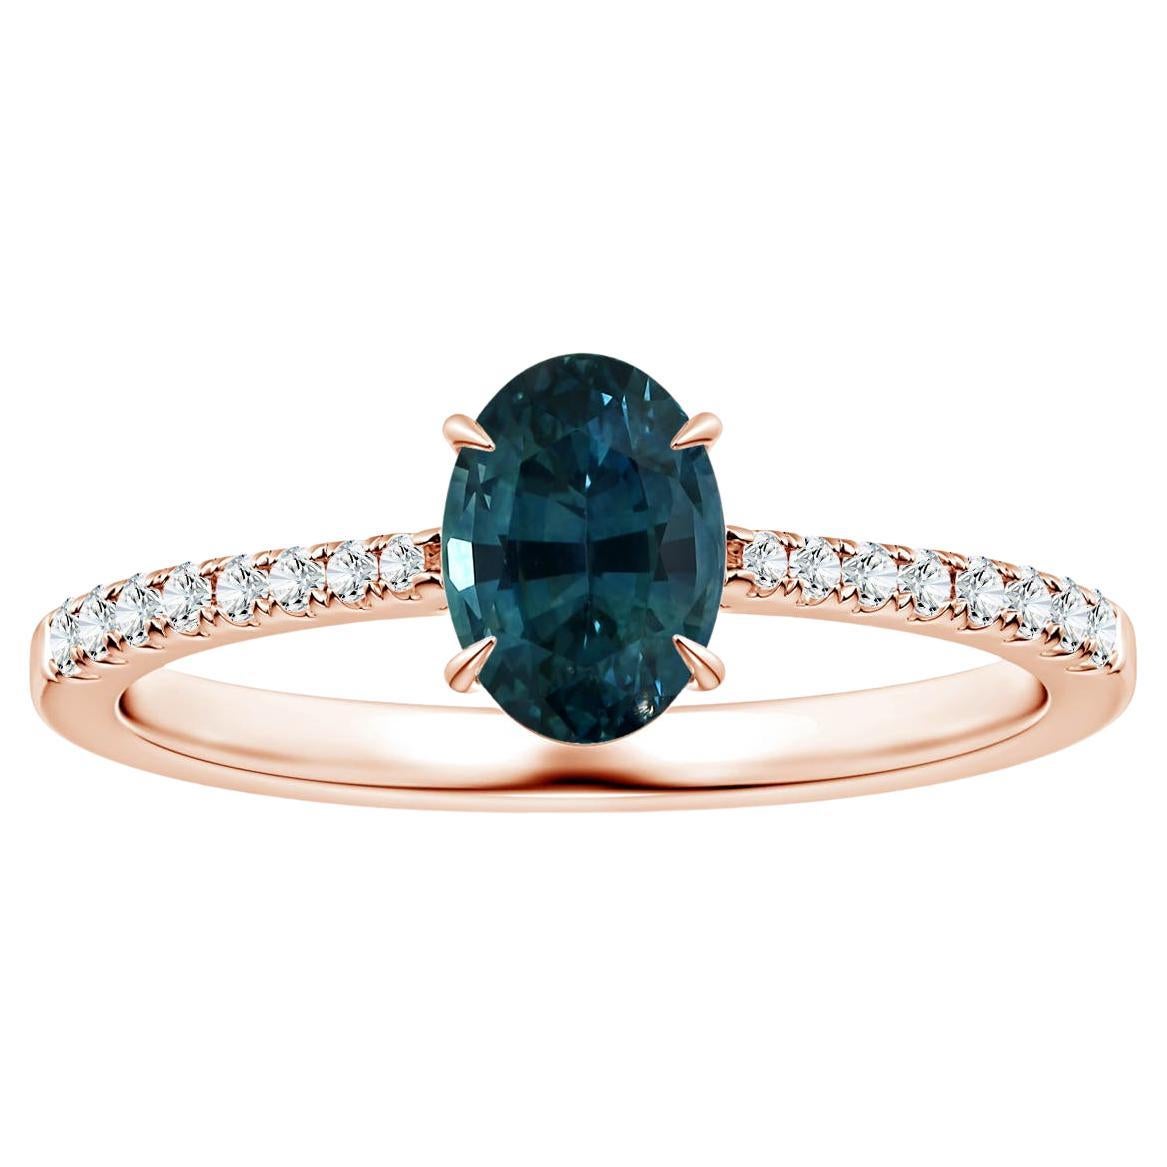 ANGARA GIA Certified Teal Sapphire Ring in Rose Gold with Diamonds